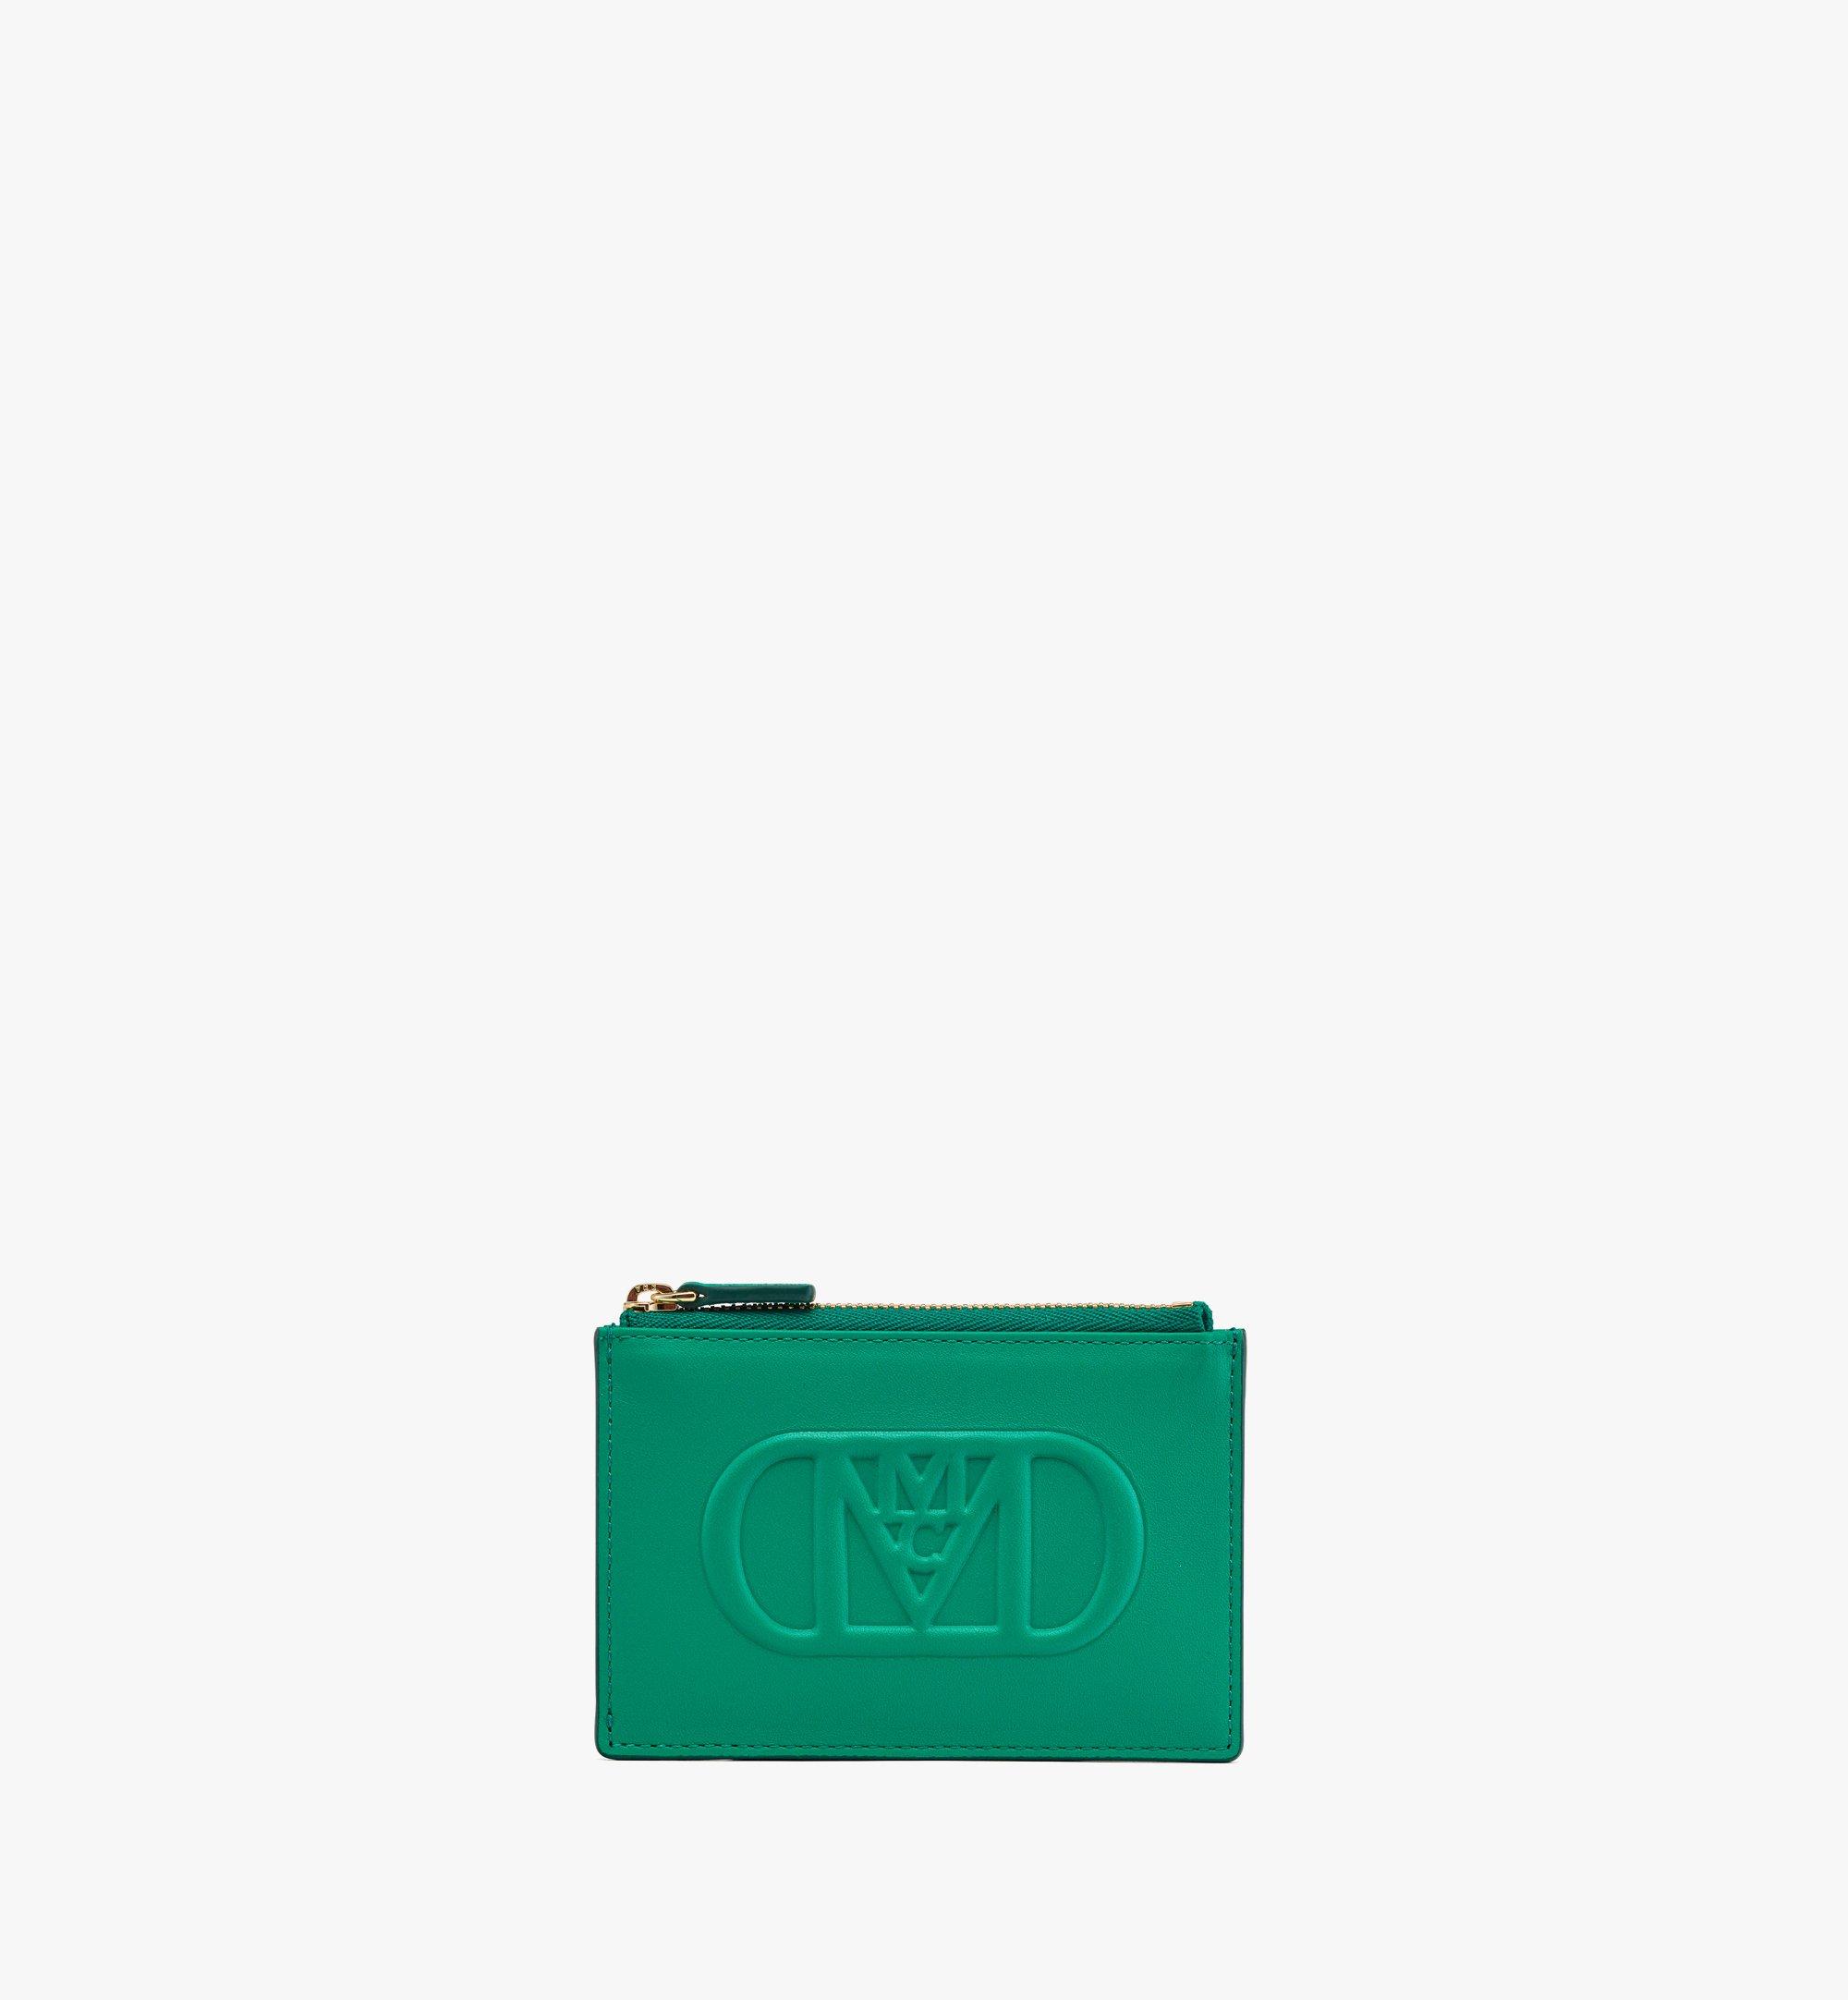 MCM Mode Travia Card Holder in Spanish Nappa Leather Green MYADSLD03J8001 Alternate View 1